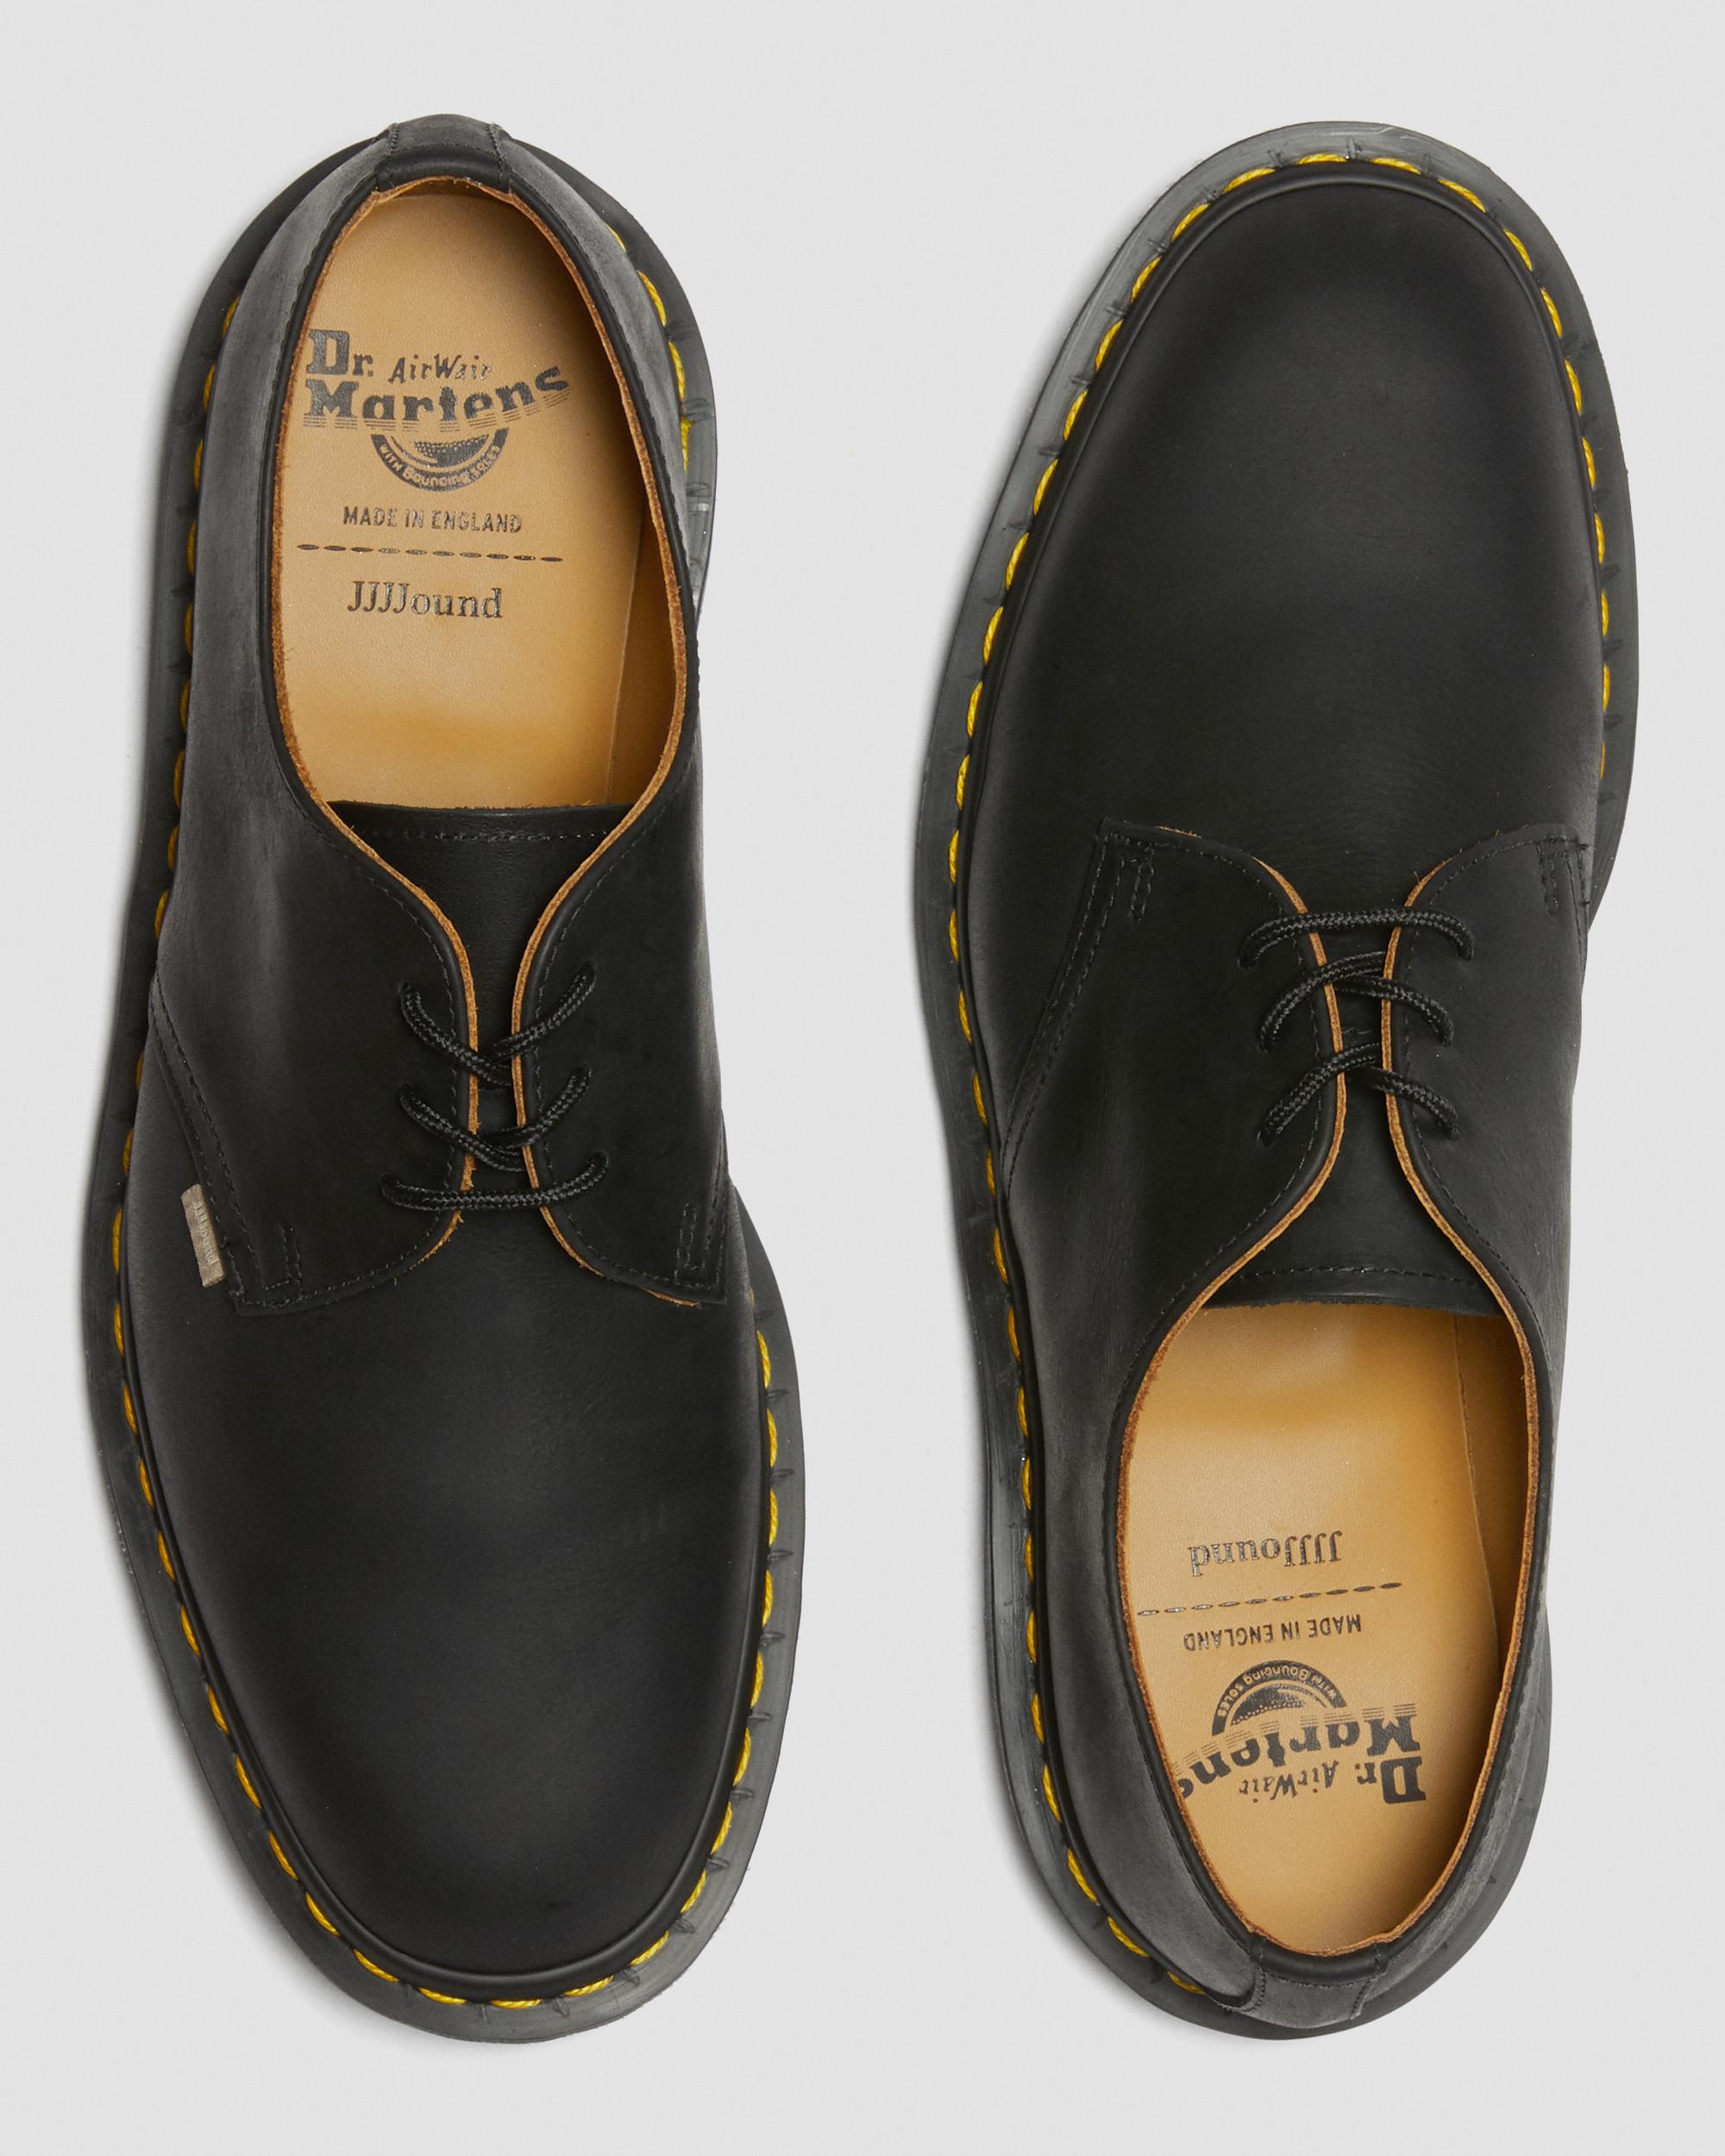 Archie II JJJJound Wyoming Leather Lace Up Shoes in Black | Dr. Martens